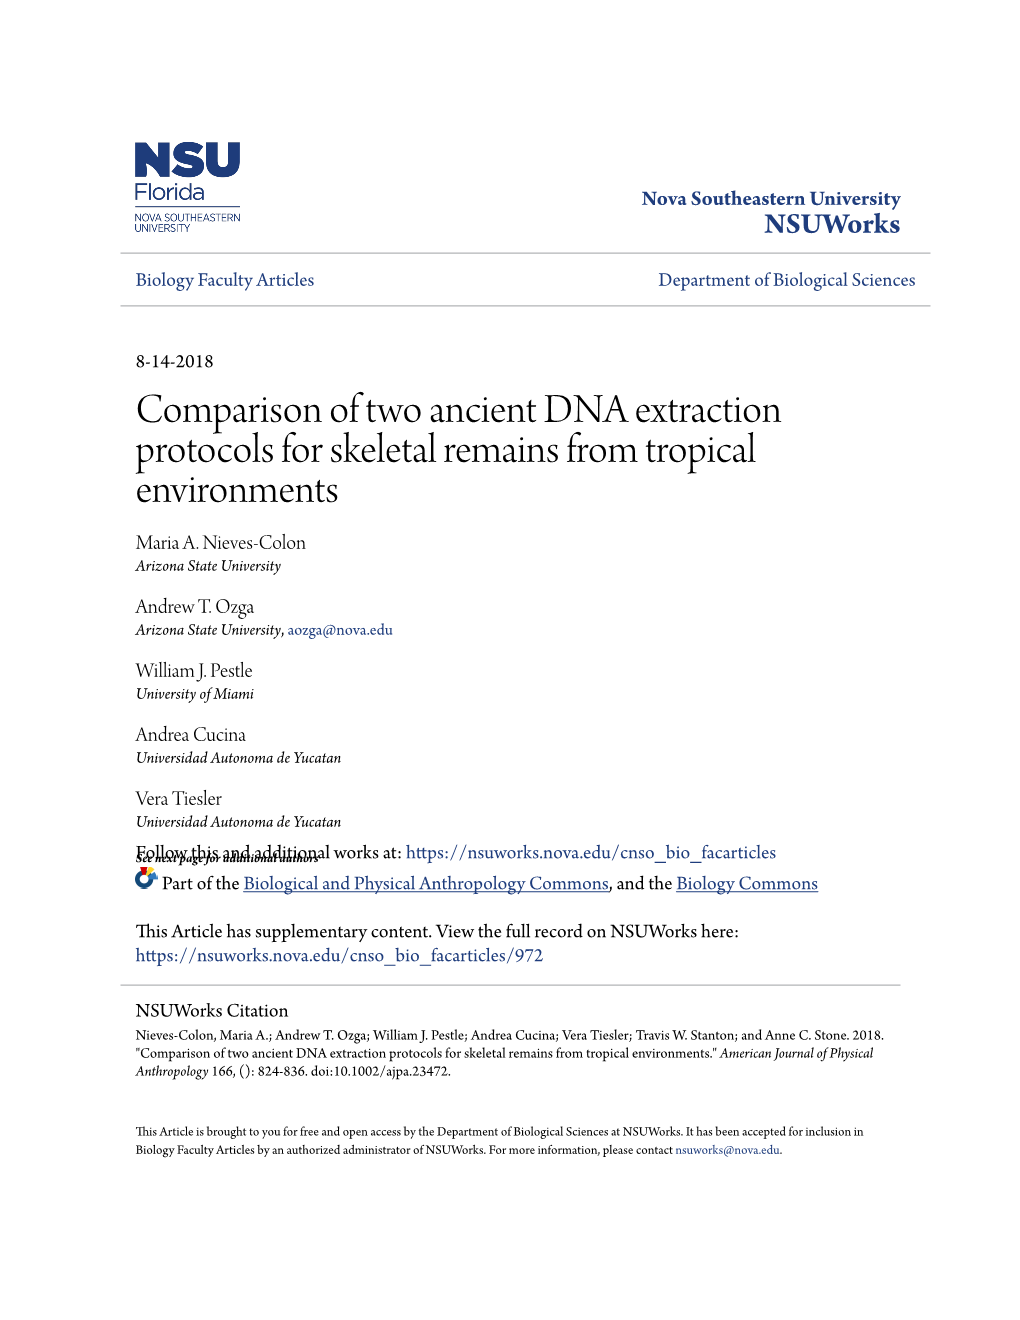 Comparison of Two Ancient DNA Extraction Protocols for Skeletal Remains from Tropical Environments Maria A